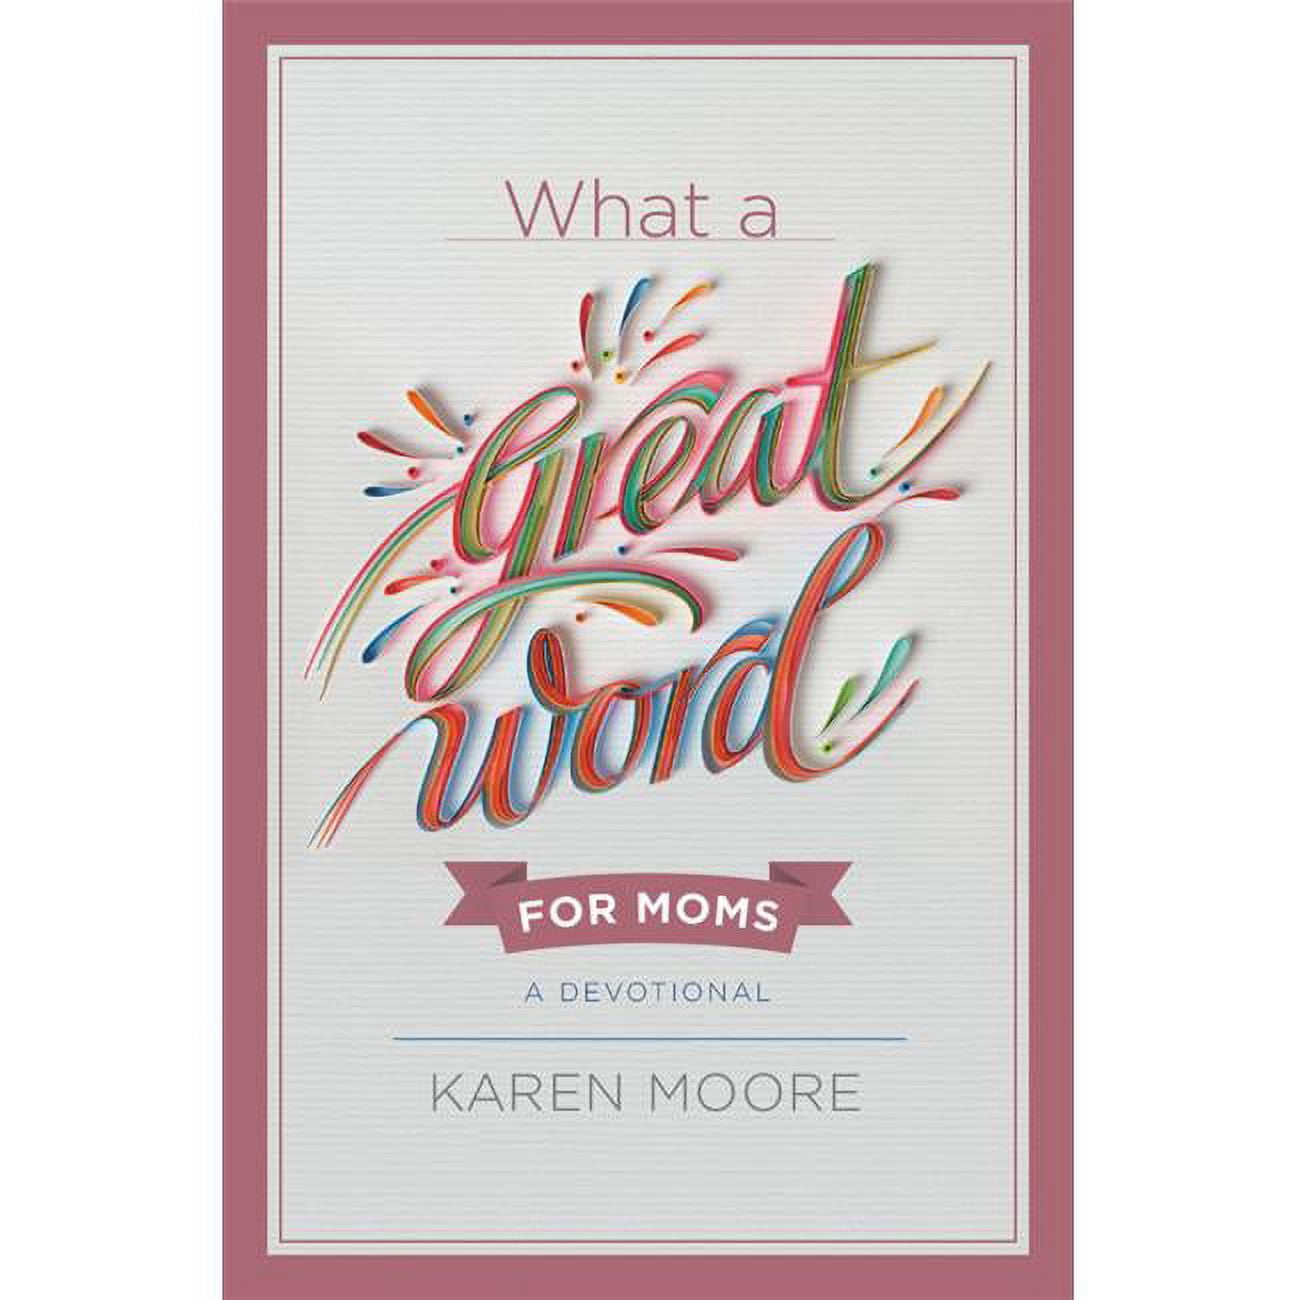 Faithwords & Hachette Book Group 154632 What A Great Word For Moms A Devotional